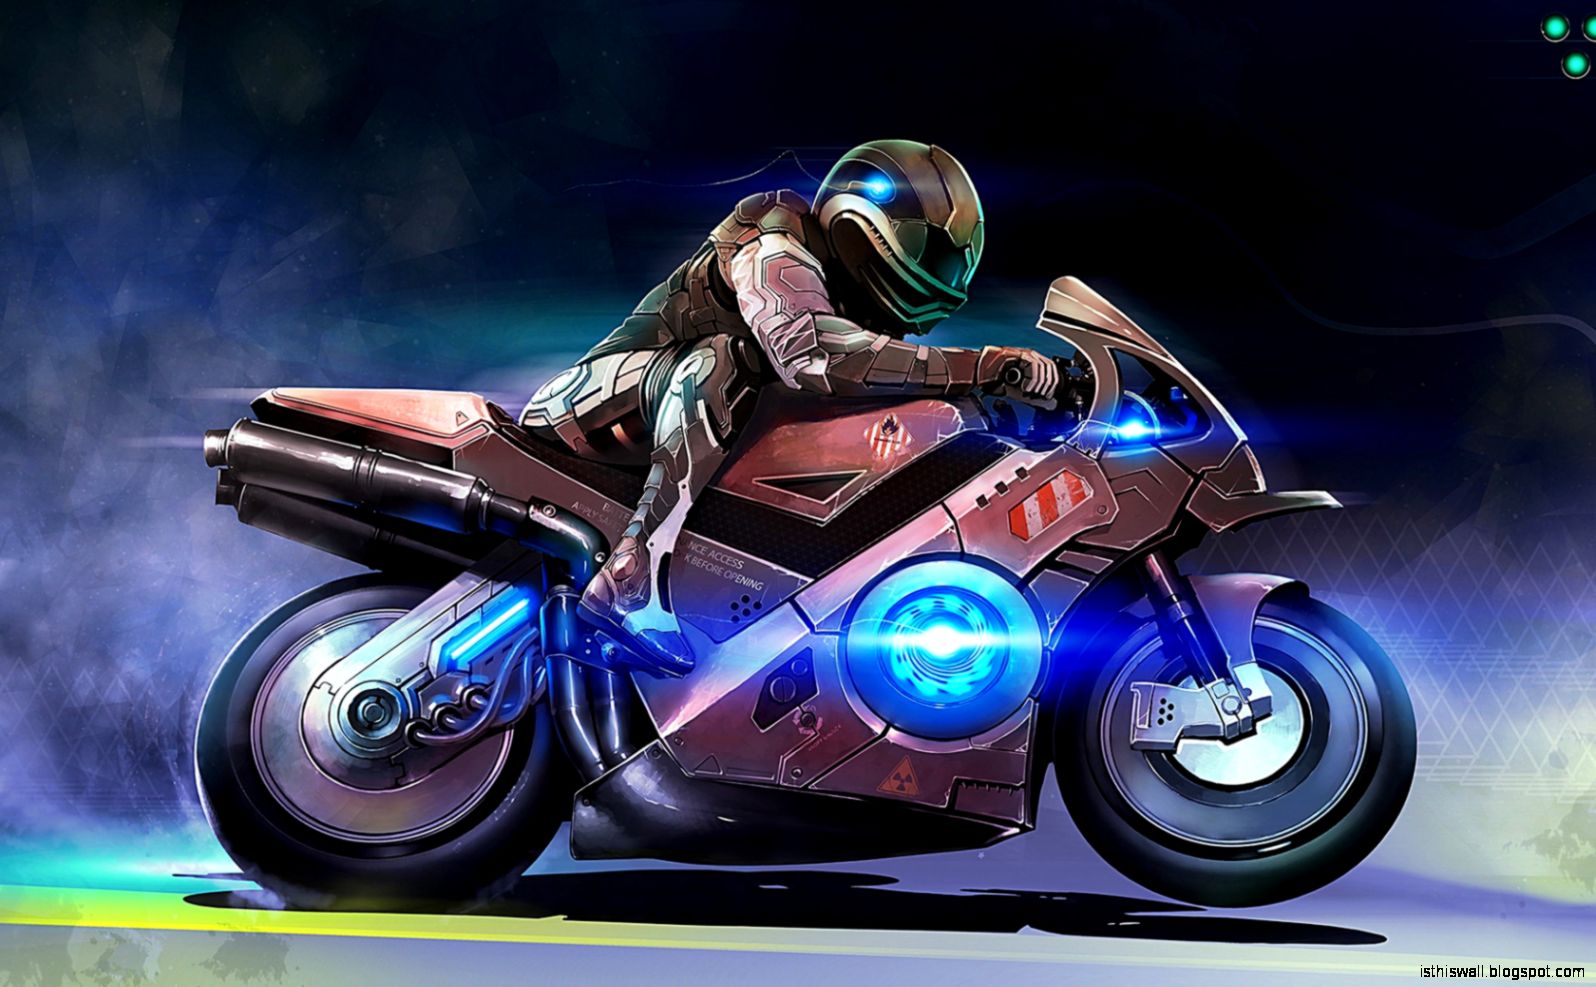 Cool Motorcycles | This Wallpapers